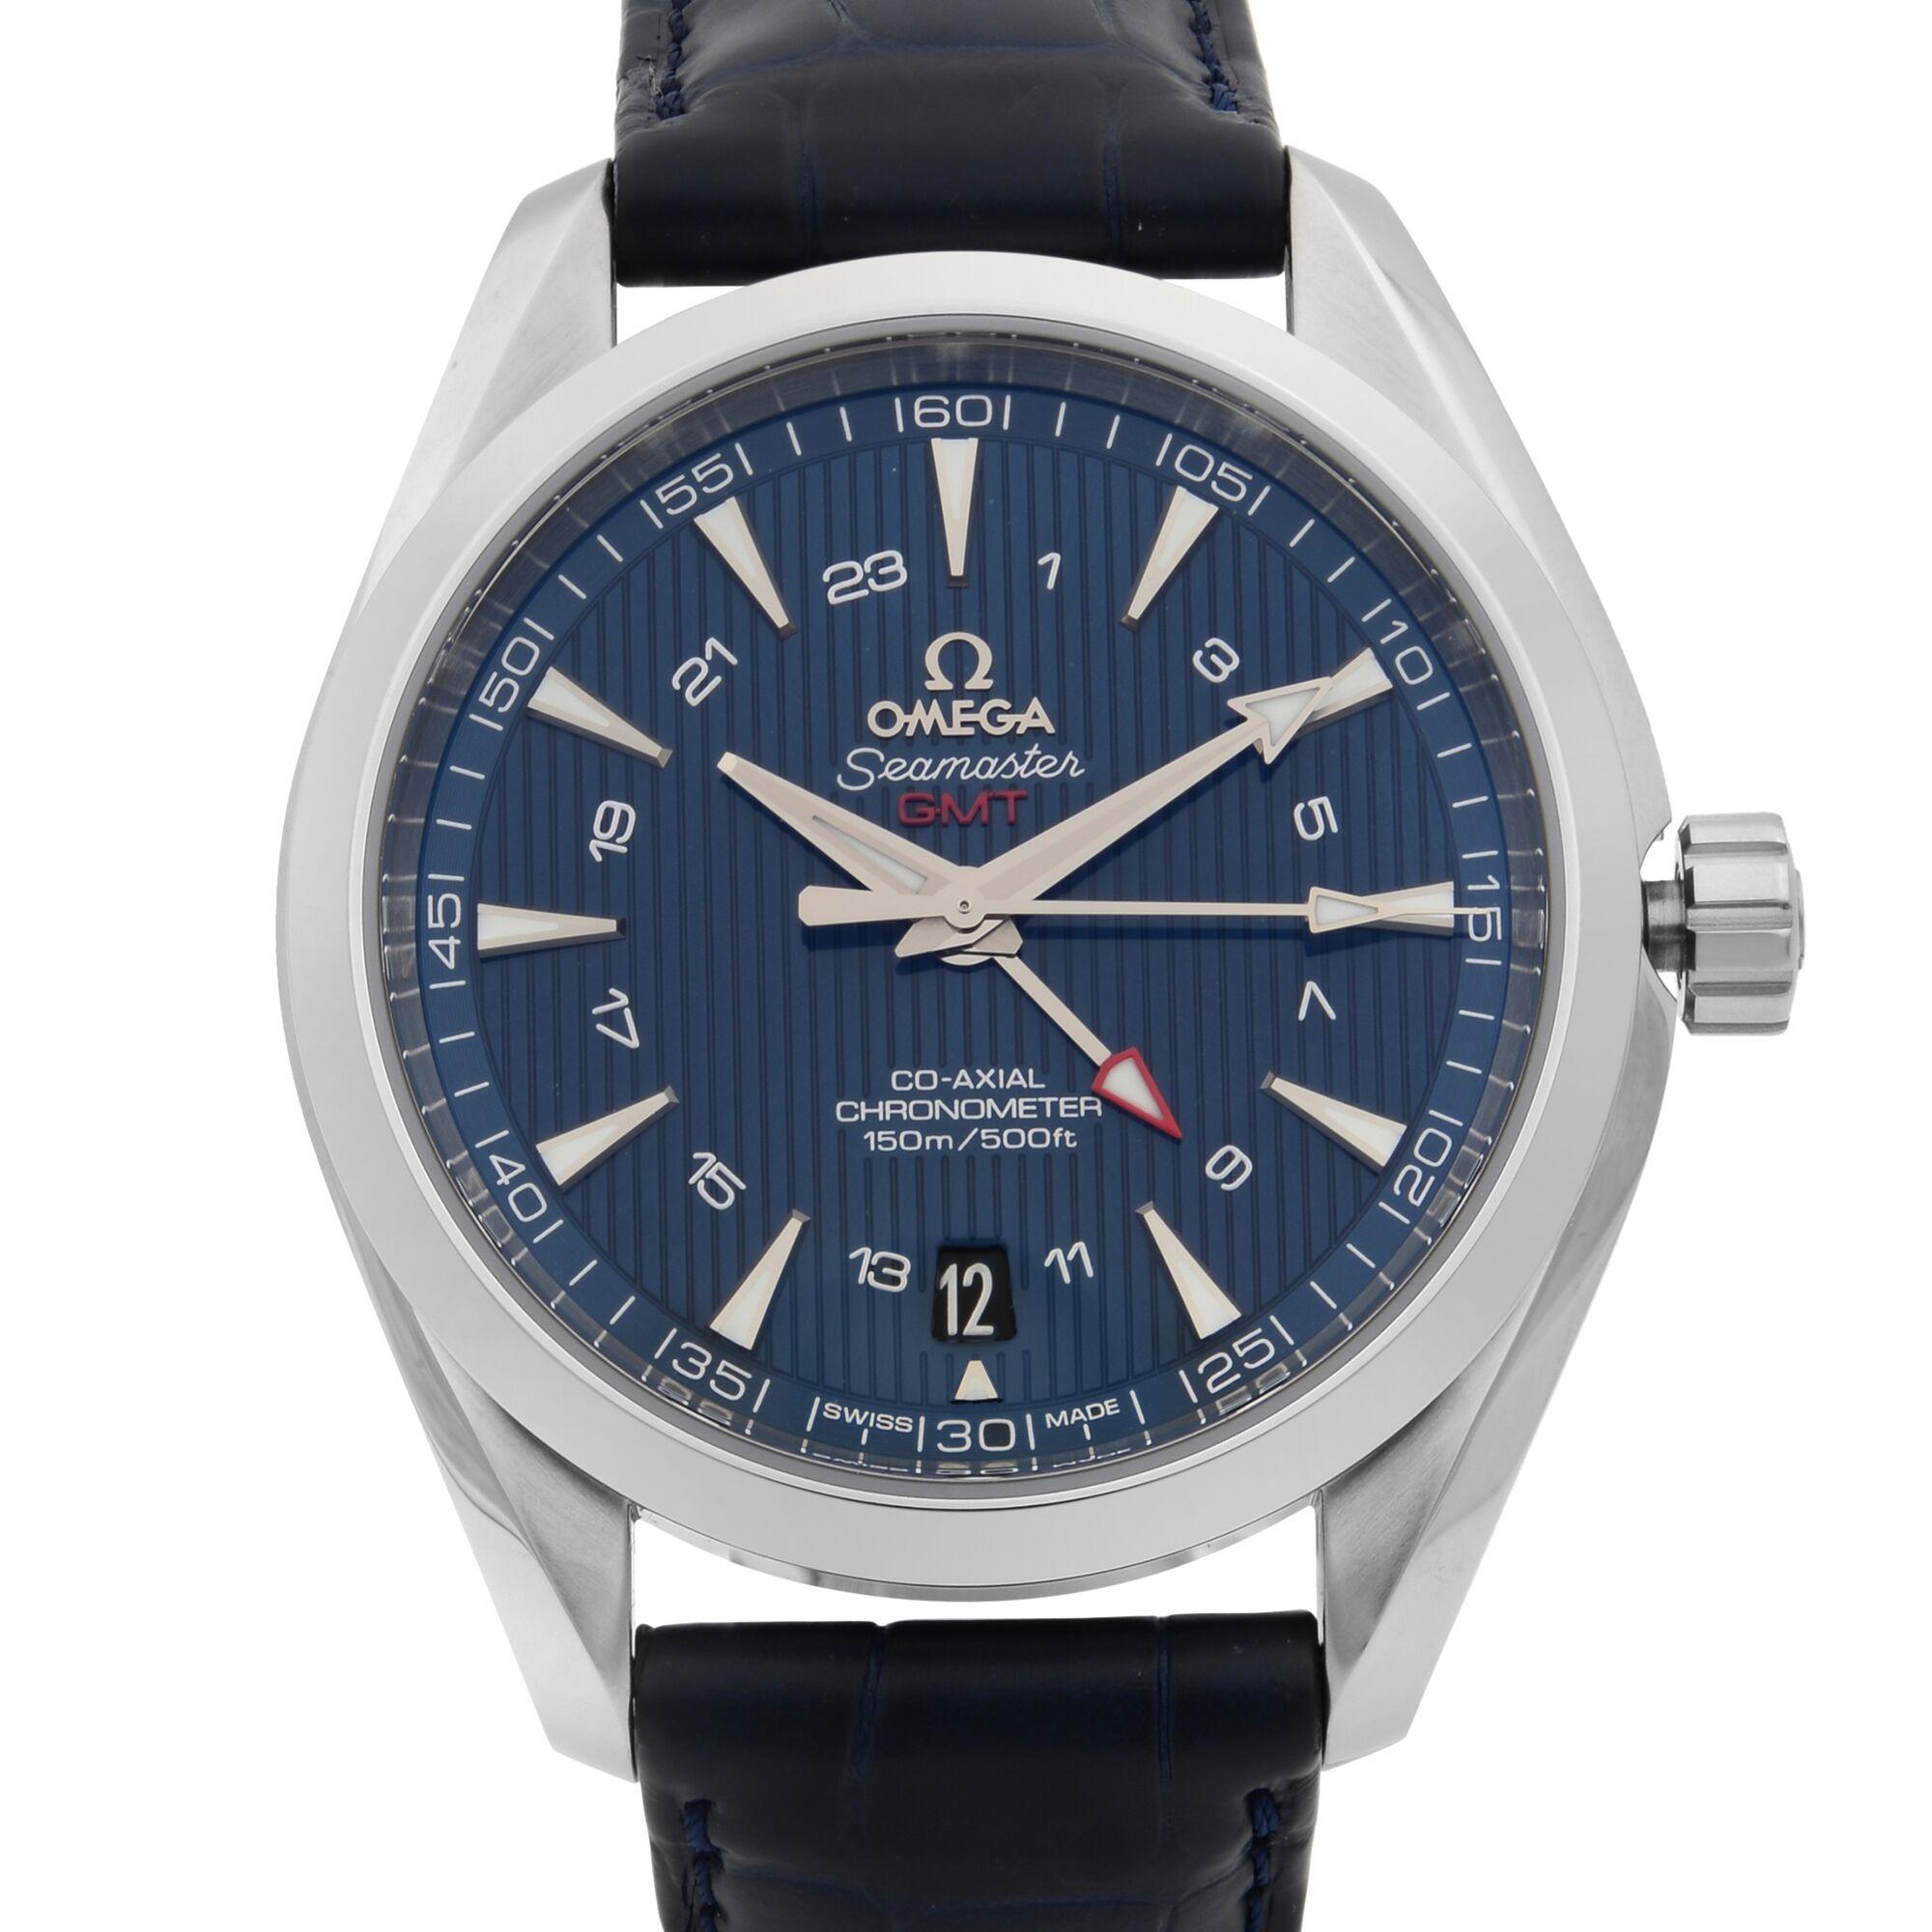 This brand new Omega  231.13.43.22.03.001 is a beautiful men's timepiece that is powered by mechanical (automatic) movement which is cased in a stainless steel case. It has a round shape face, gmt, date indicator dial and has hand arabic numerals,